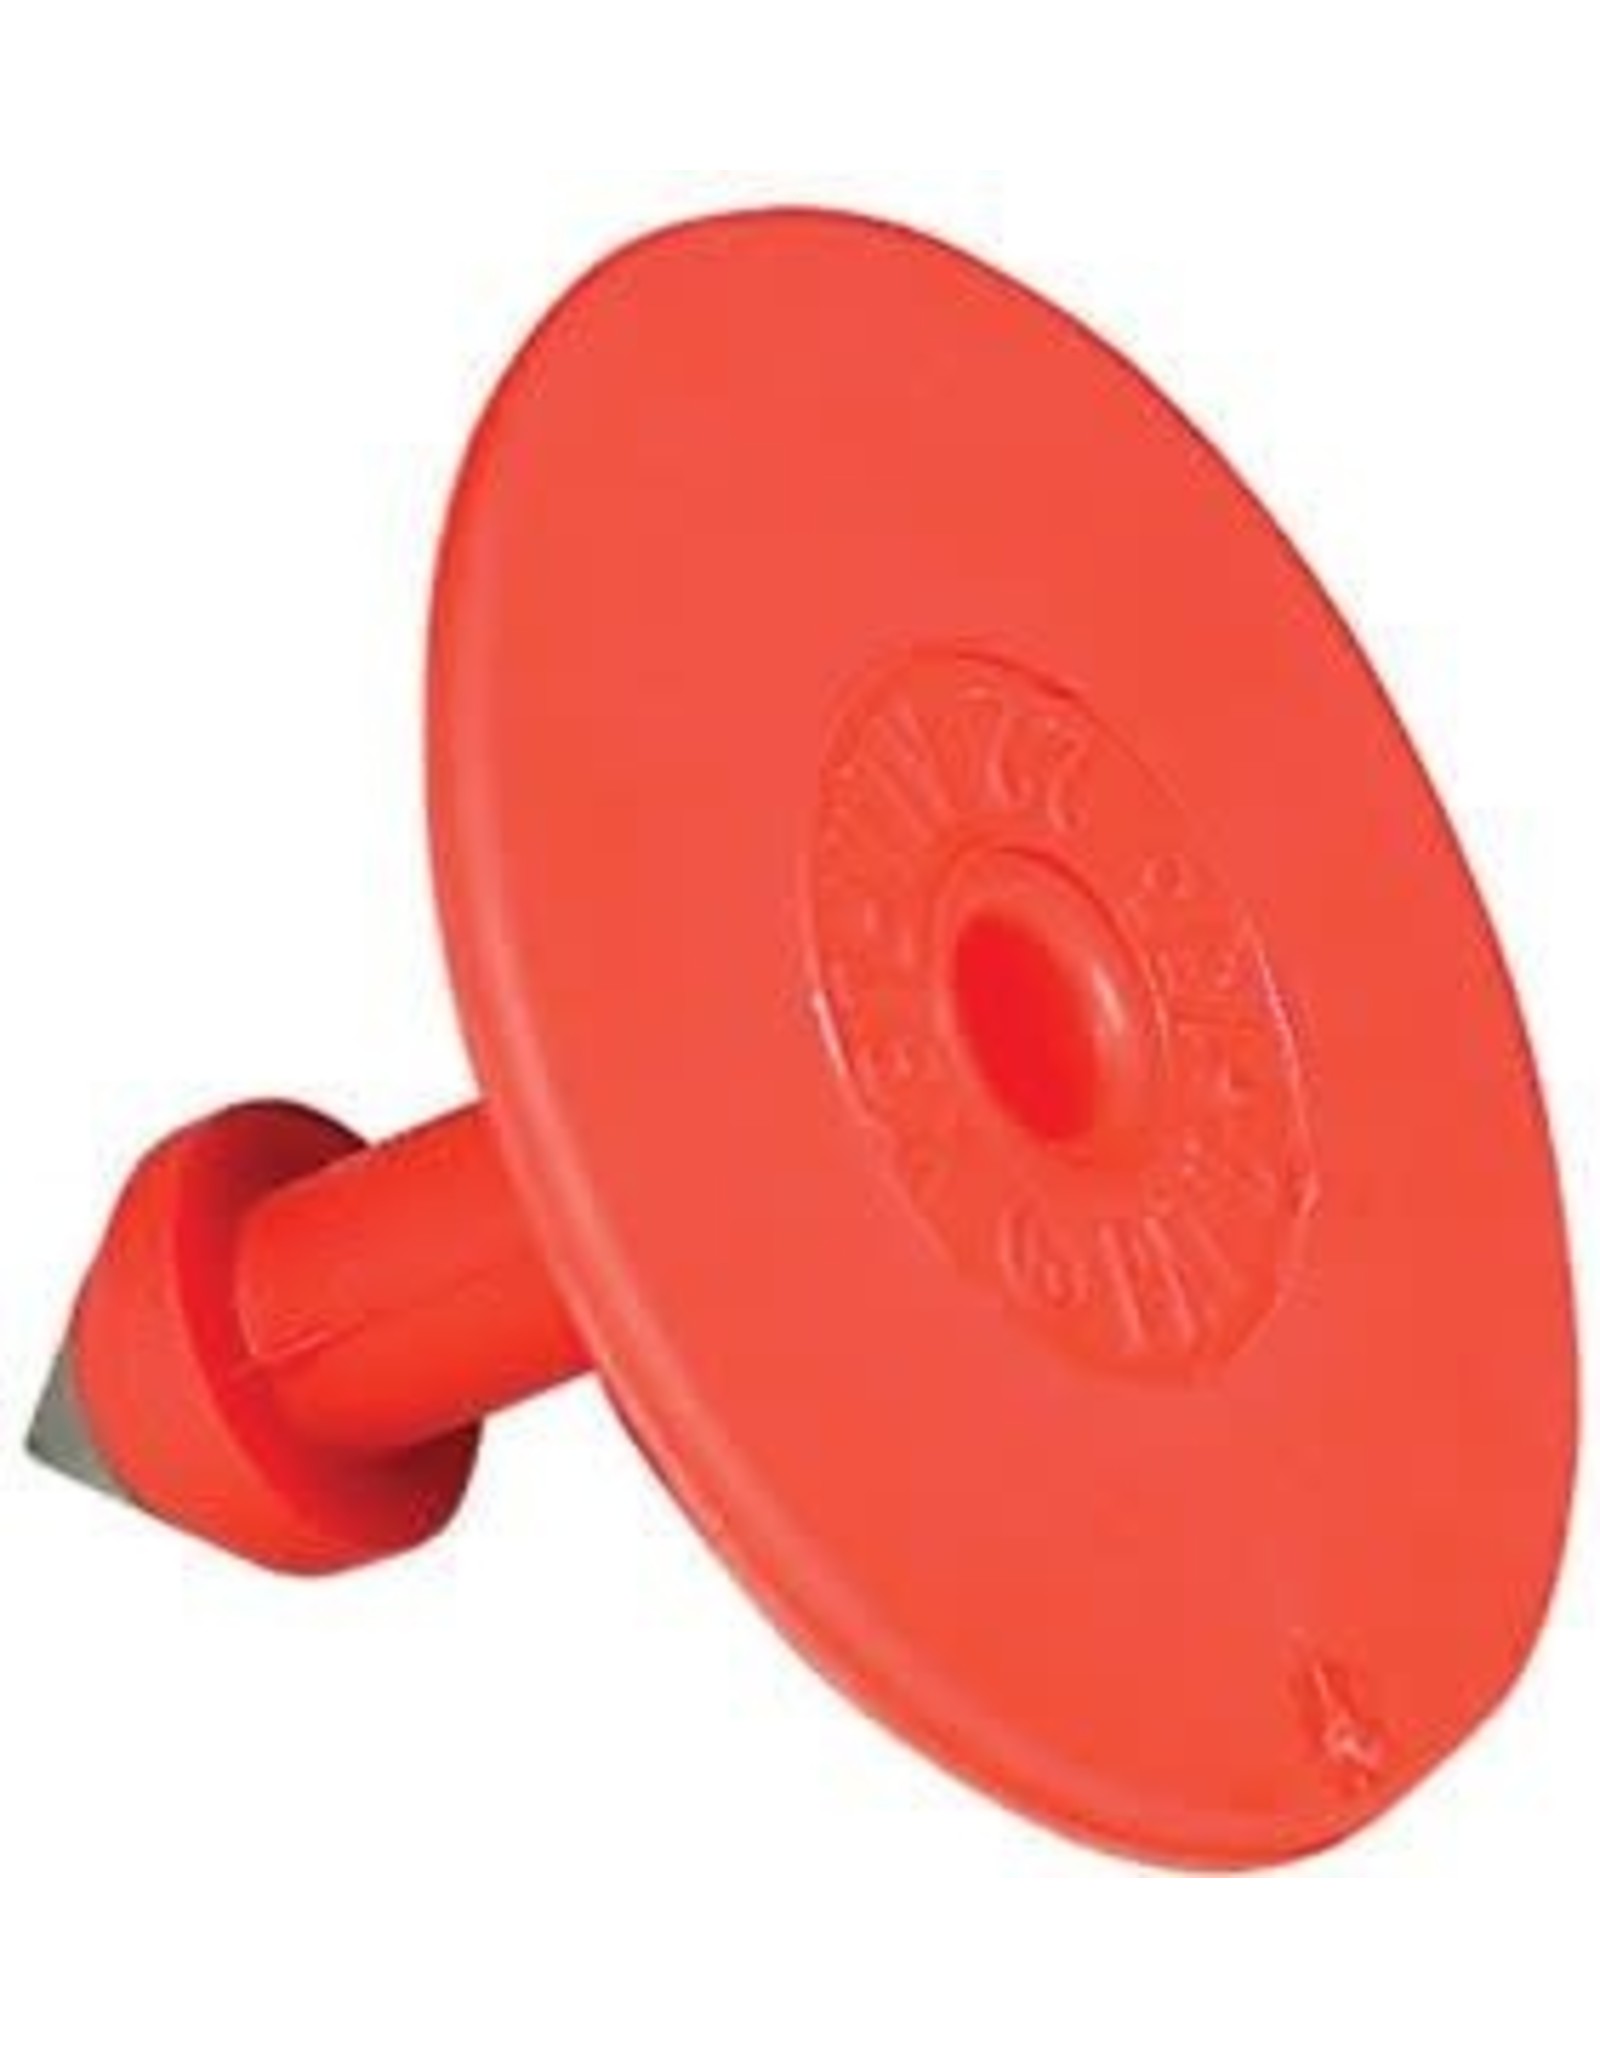 Allflex TAG* Allflex BUTTONS Sml Male 25s - Red GSM-R